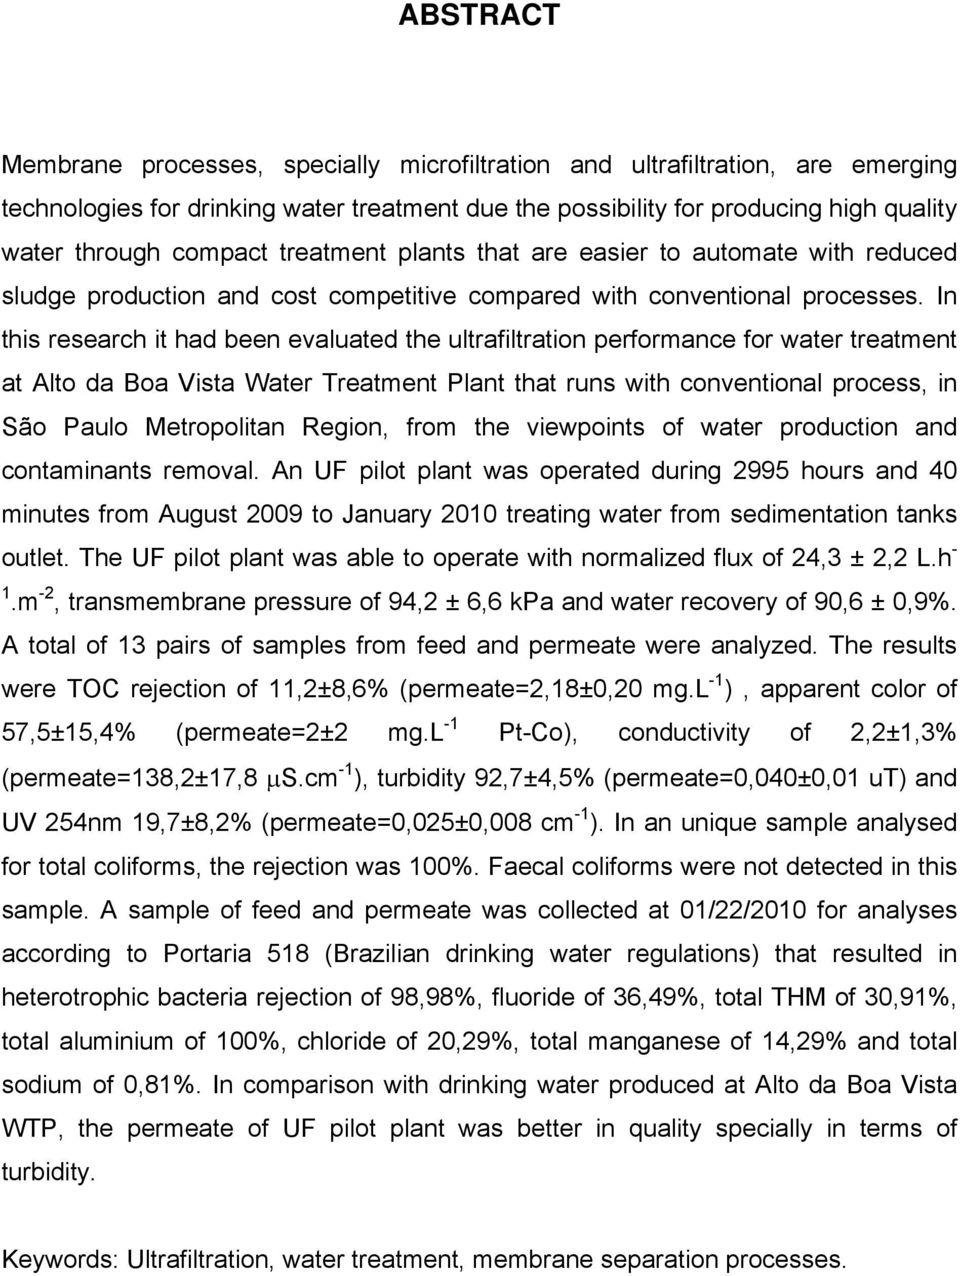 In this research it had been evaluated the ultrafiltration performance for water treatment at Alto da Boa Vista Water Treatment Plant that runs with conventional process, in São Paulo Metropolitan